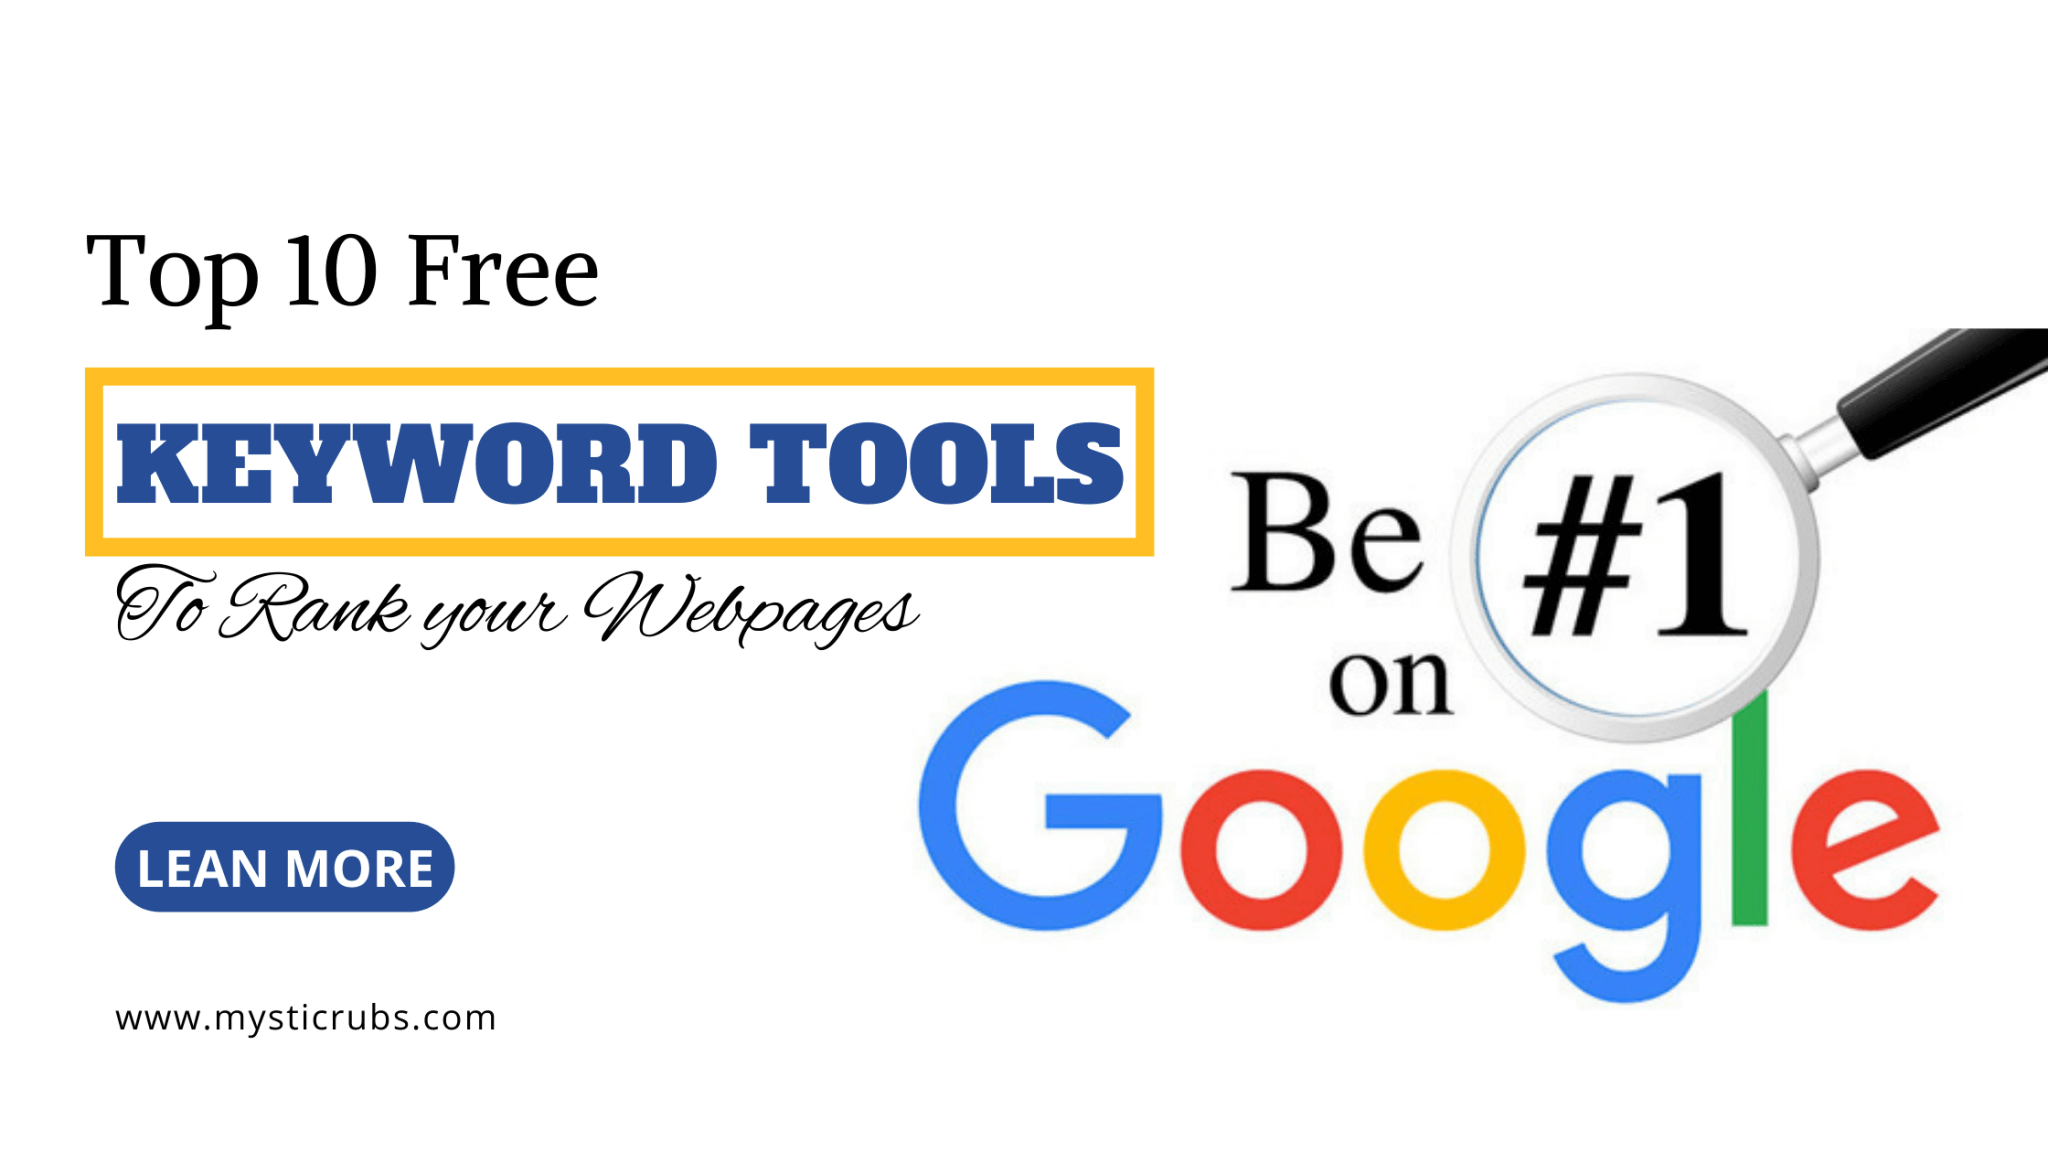 Maximize Your Seo Strategy 100% with Top 10 Free Keyword Tools